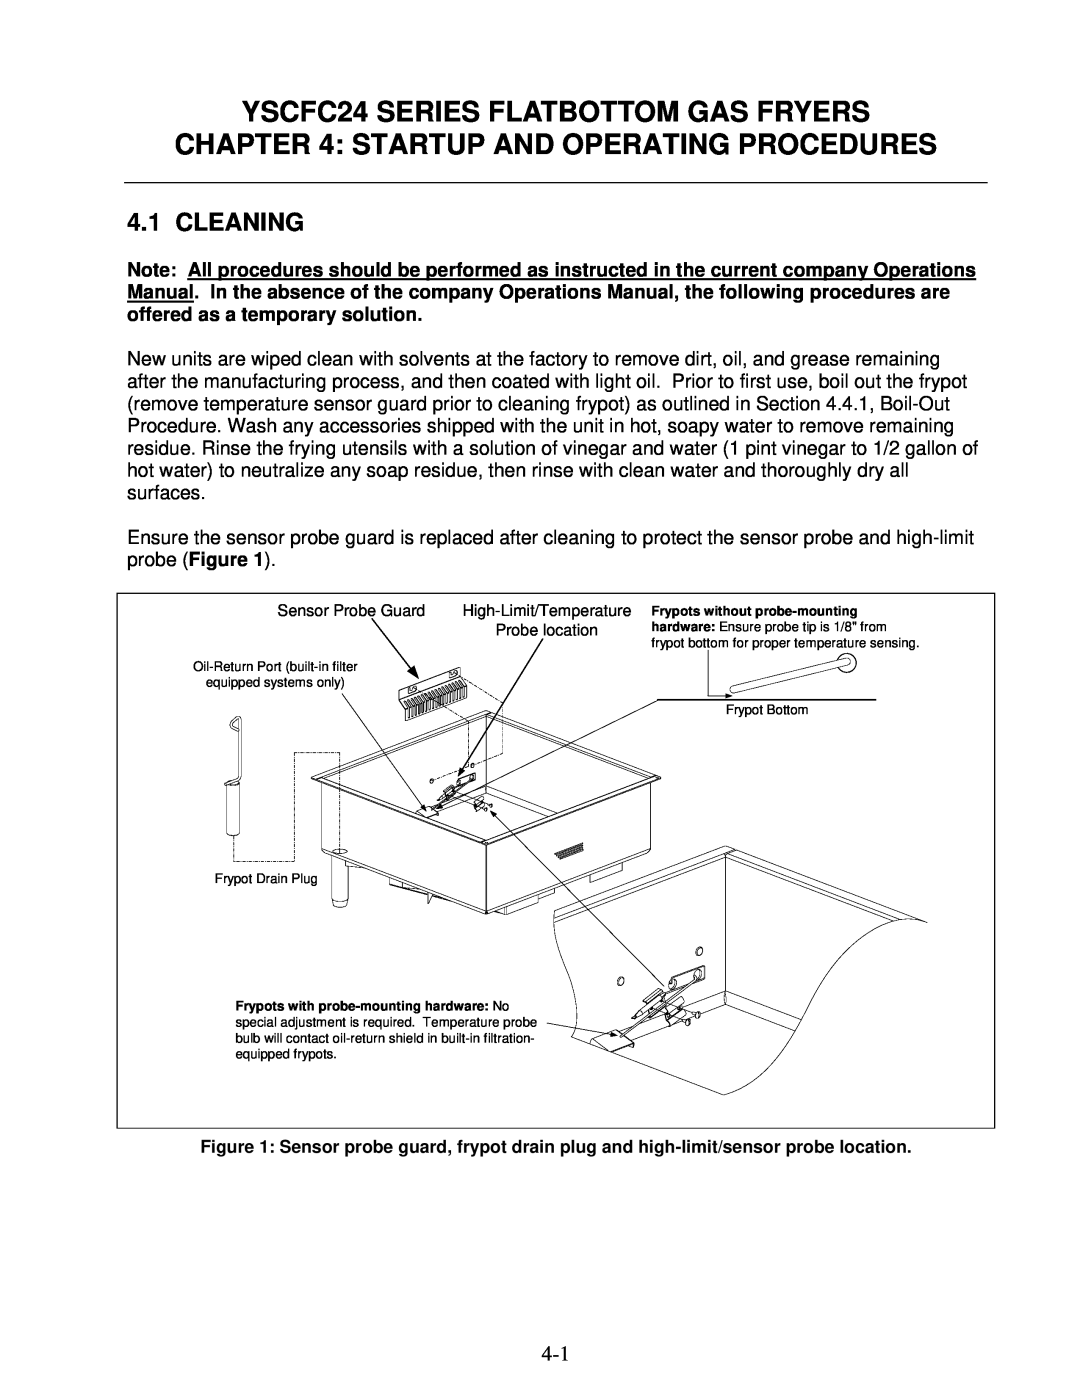 Frymaster operation manual Startup And Operating Procedures, Cleaning, YSCFC24 SERIES FLATBOTTOM GAS FRYERS 